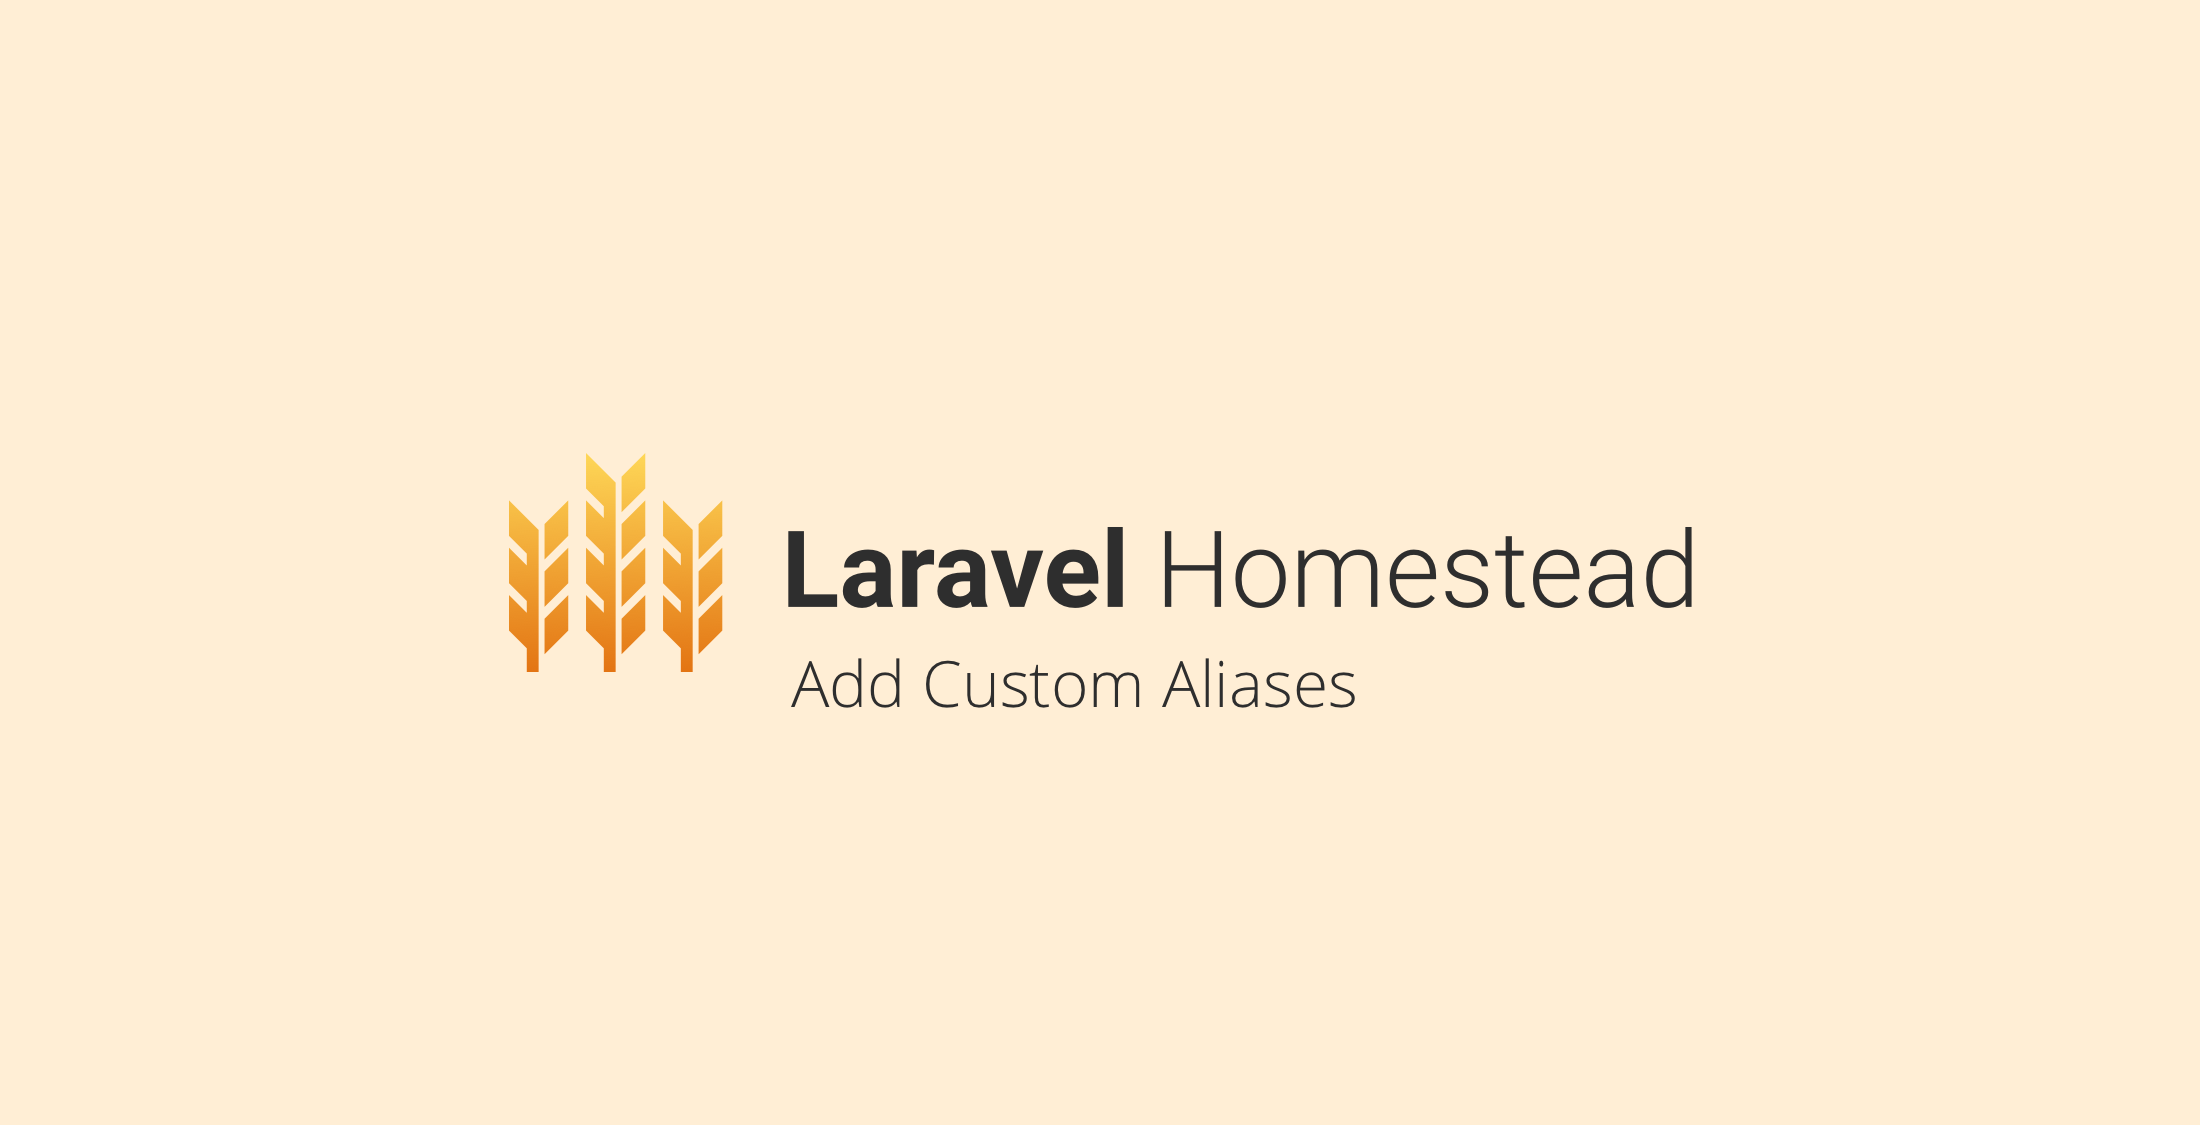 Add Your Own Aliases to Laravel Homestead image